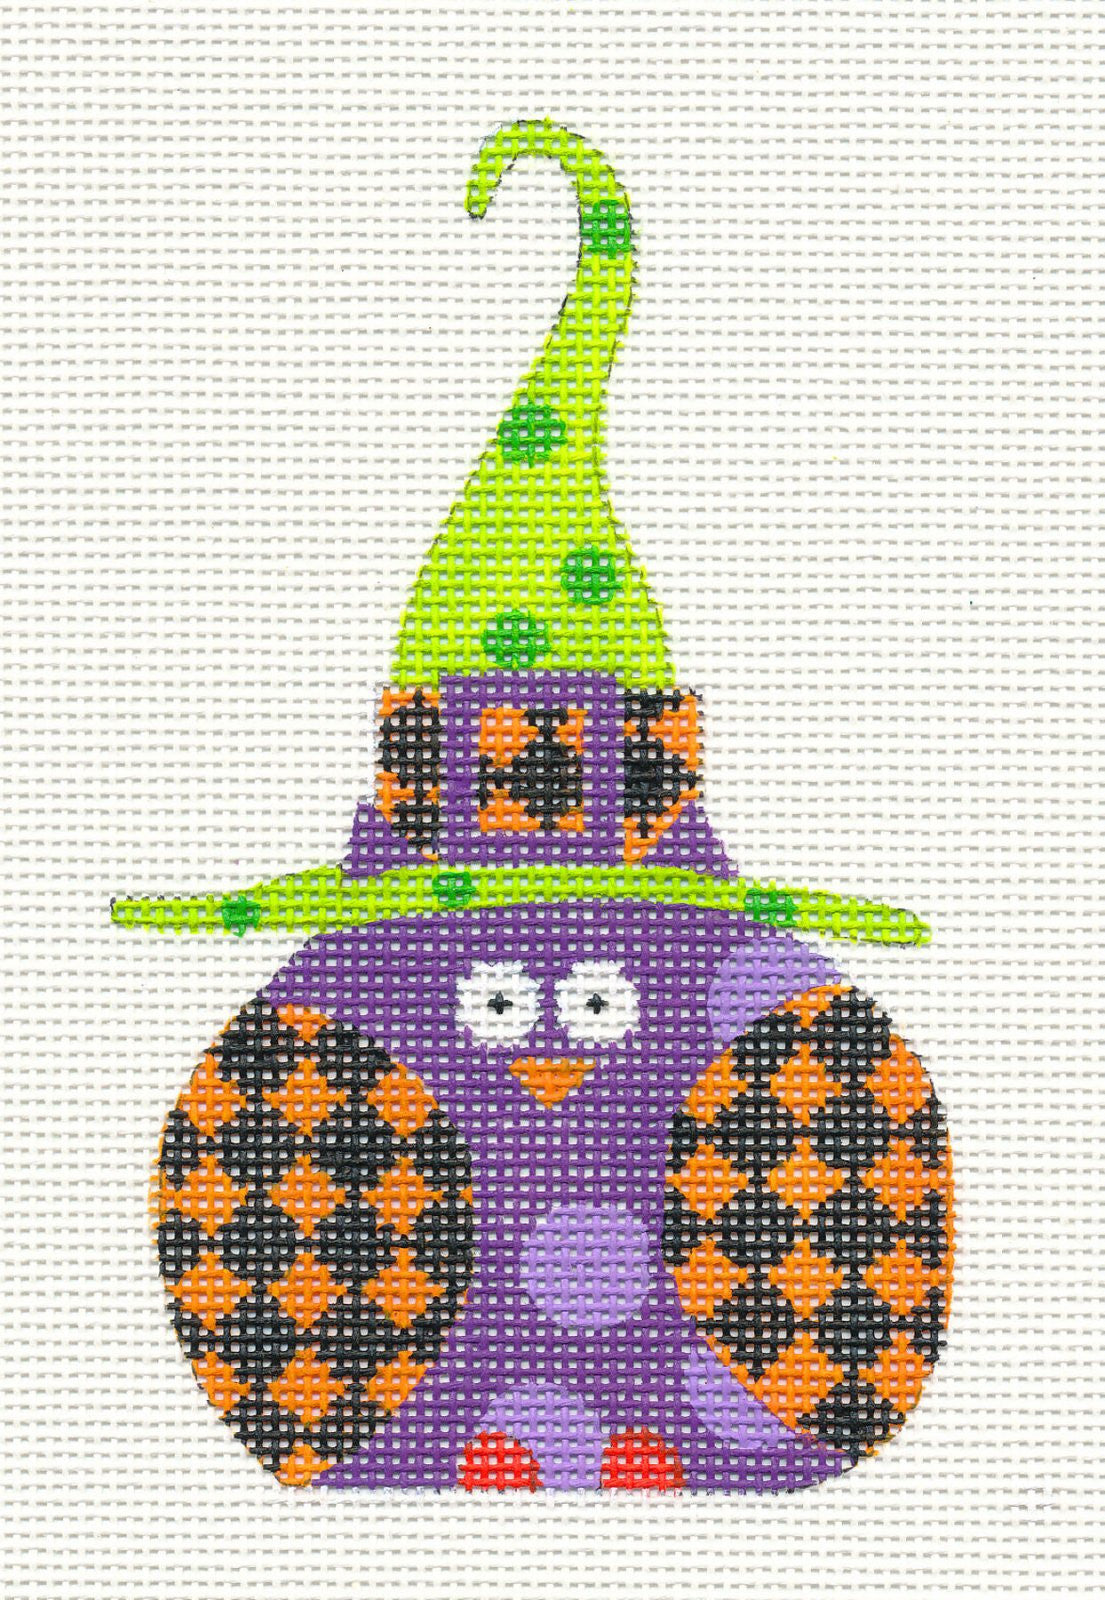 Halloween Orange Checked Witch Owl Ornament on Handpainted Needlepoint Canvas